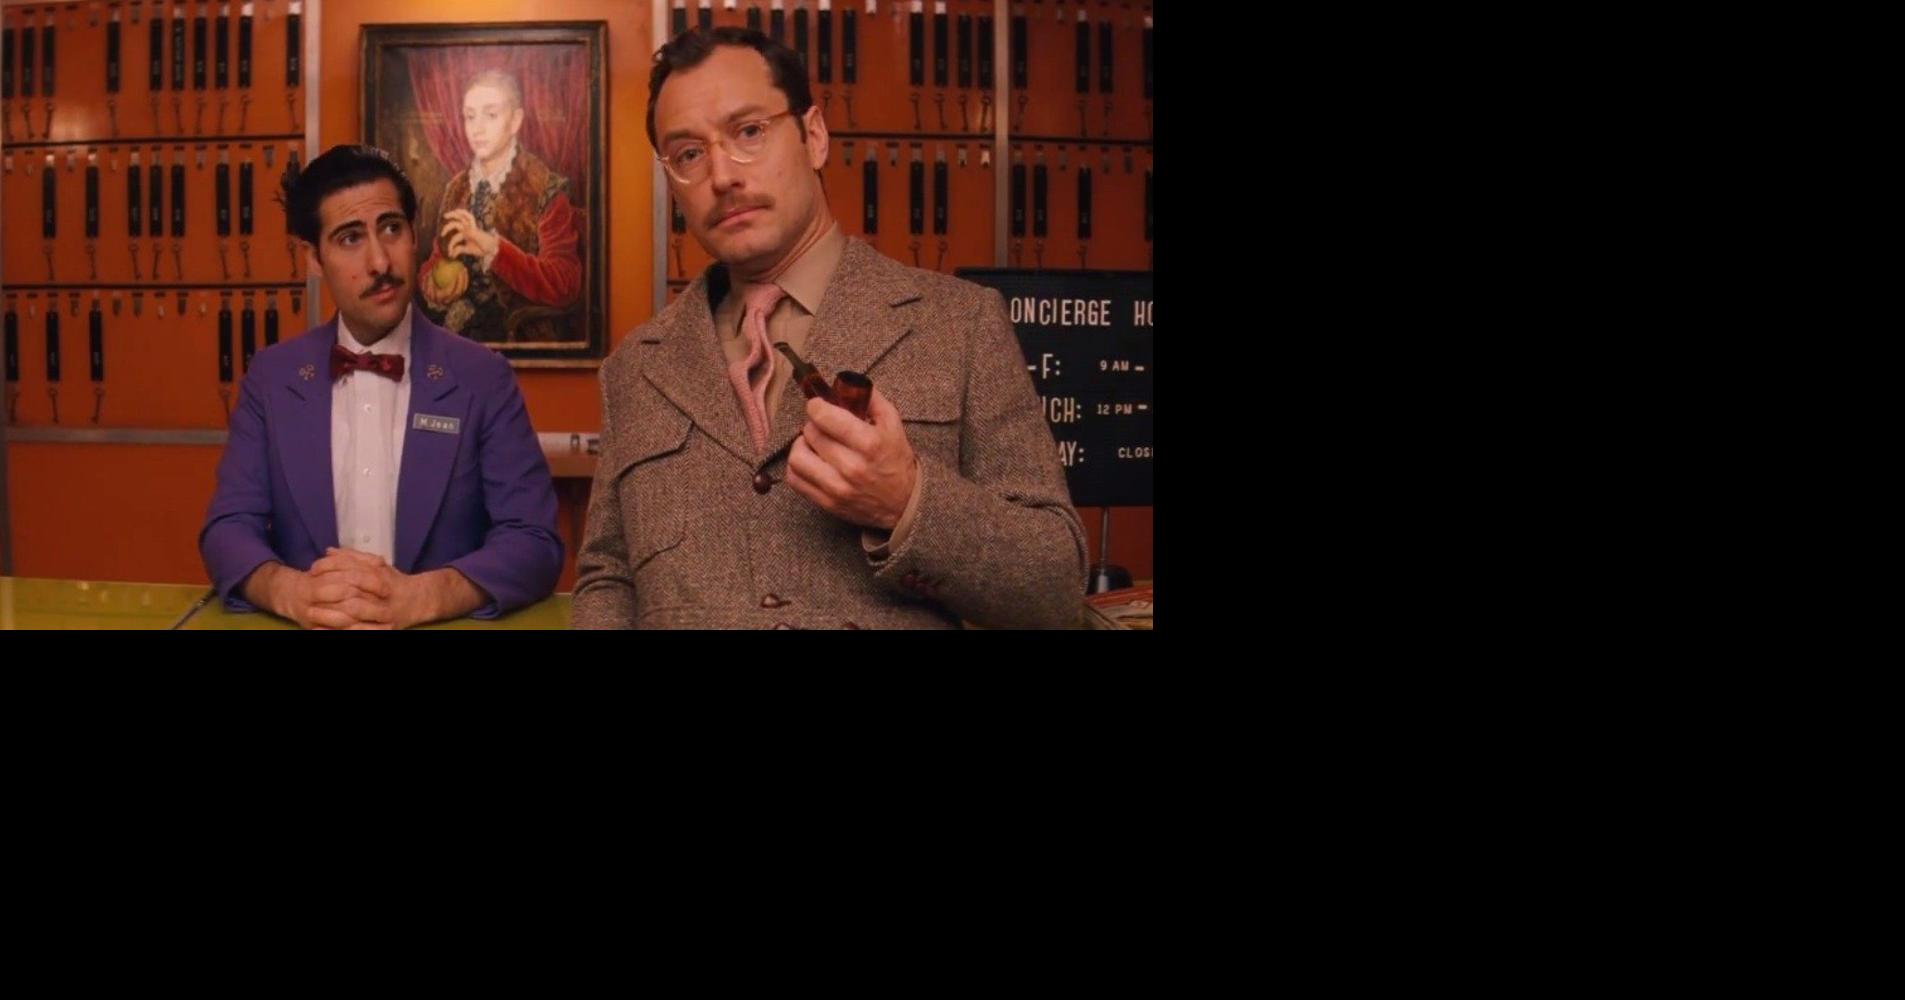 REVIEW: Absurdist comedy 'Grand Budapest Hotel' is best left vacant, Entertainment